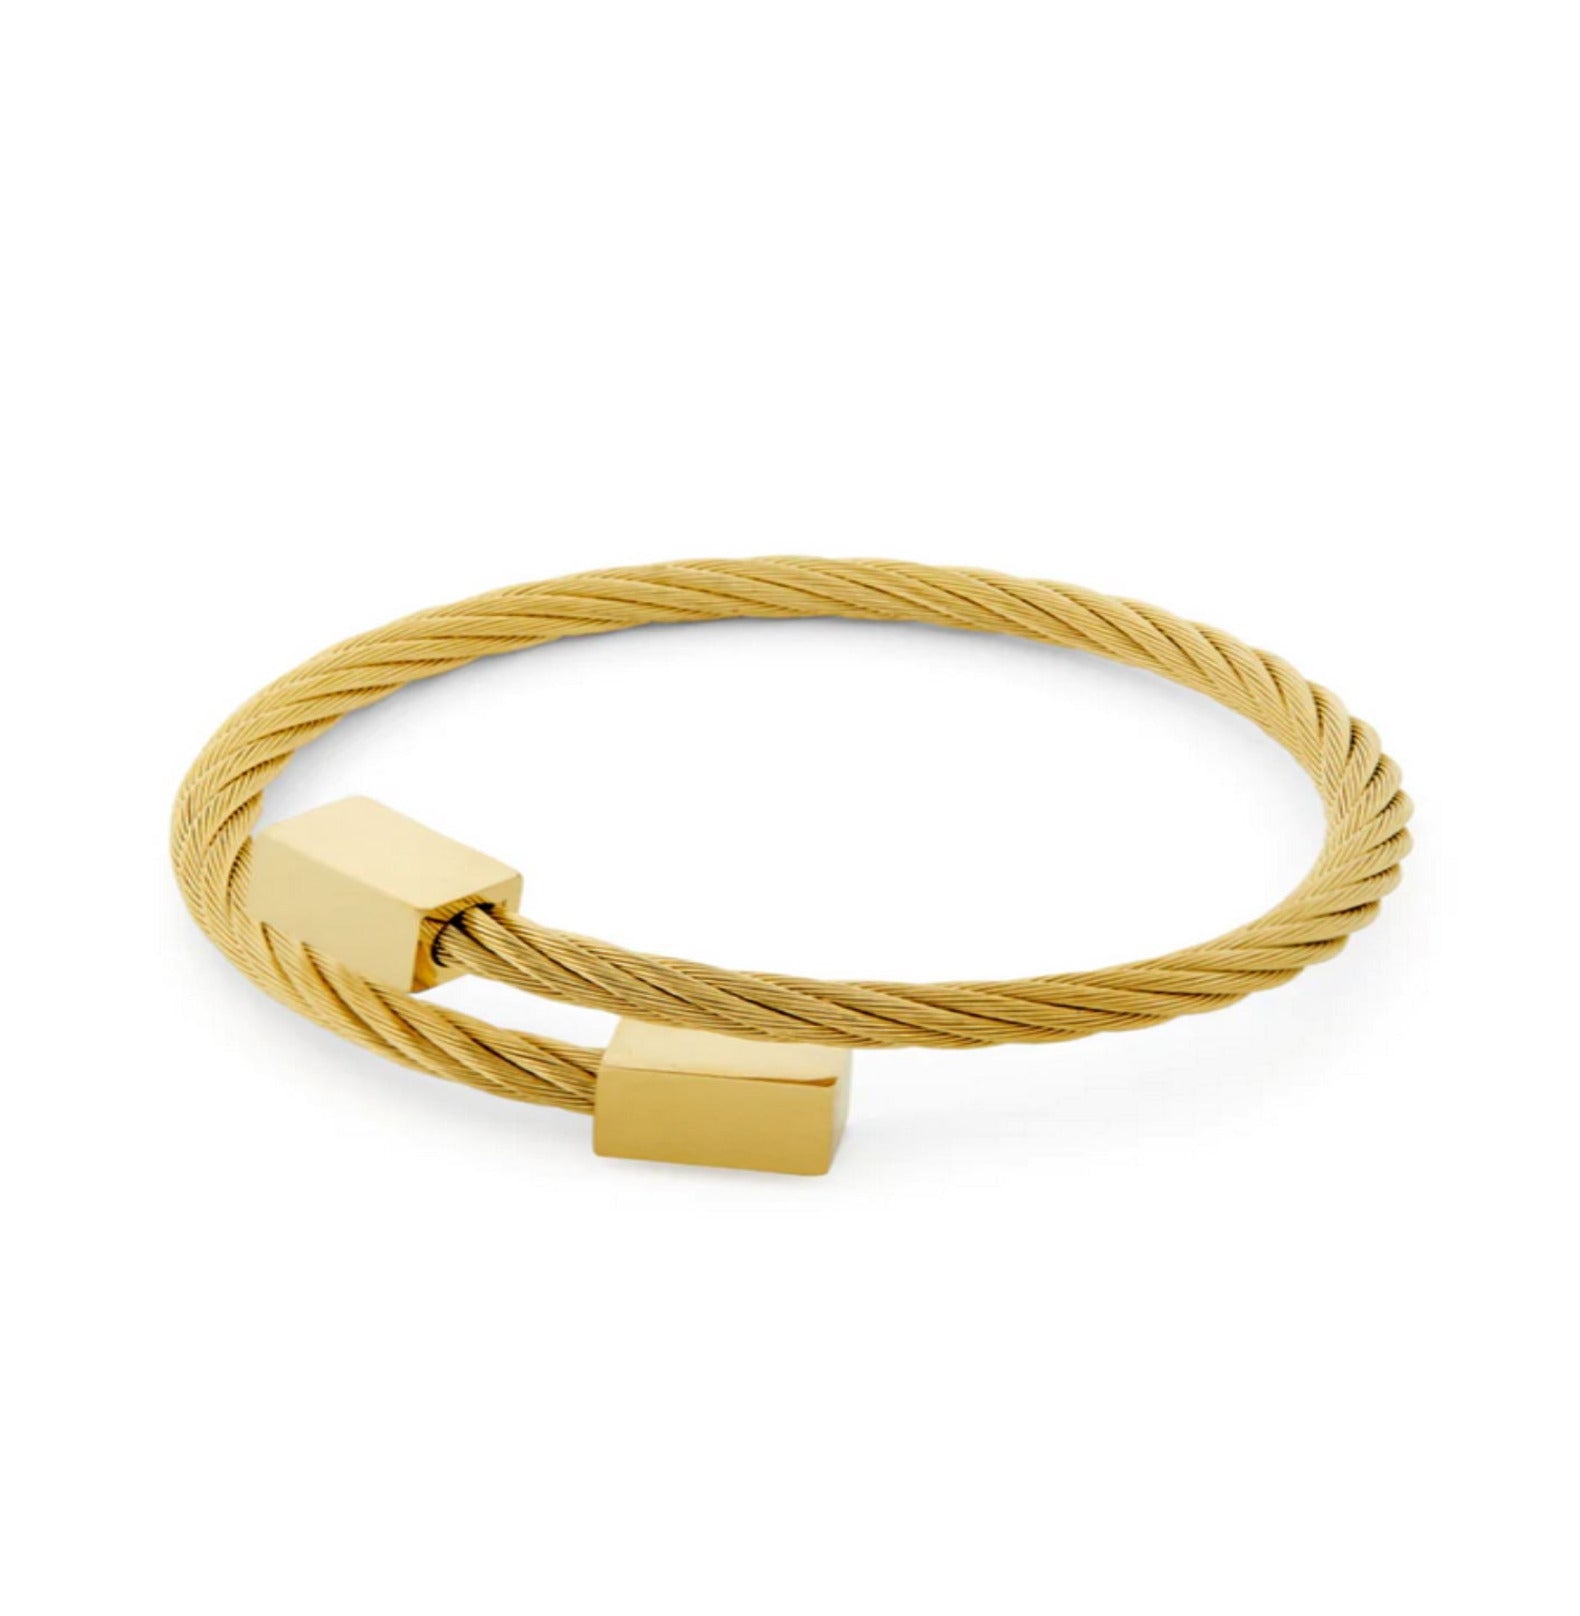 SQUARED TWISTER BANGLE BRACELET ring Yubama Jewelry Online Store - The Elegant Designs of Gold and Silver ! GOLD 